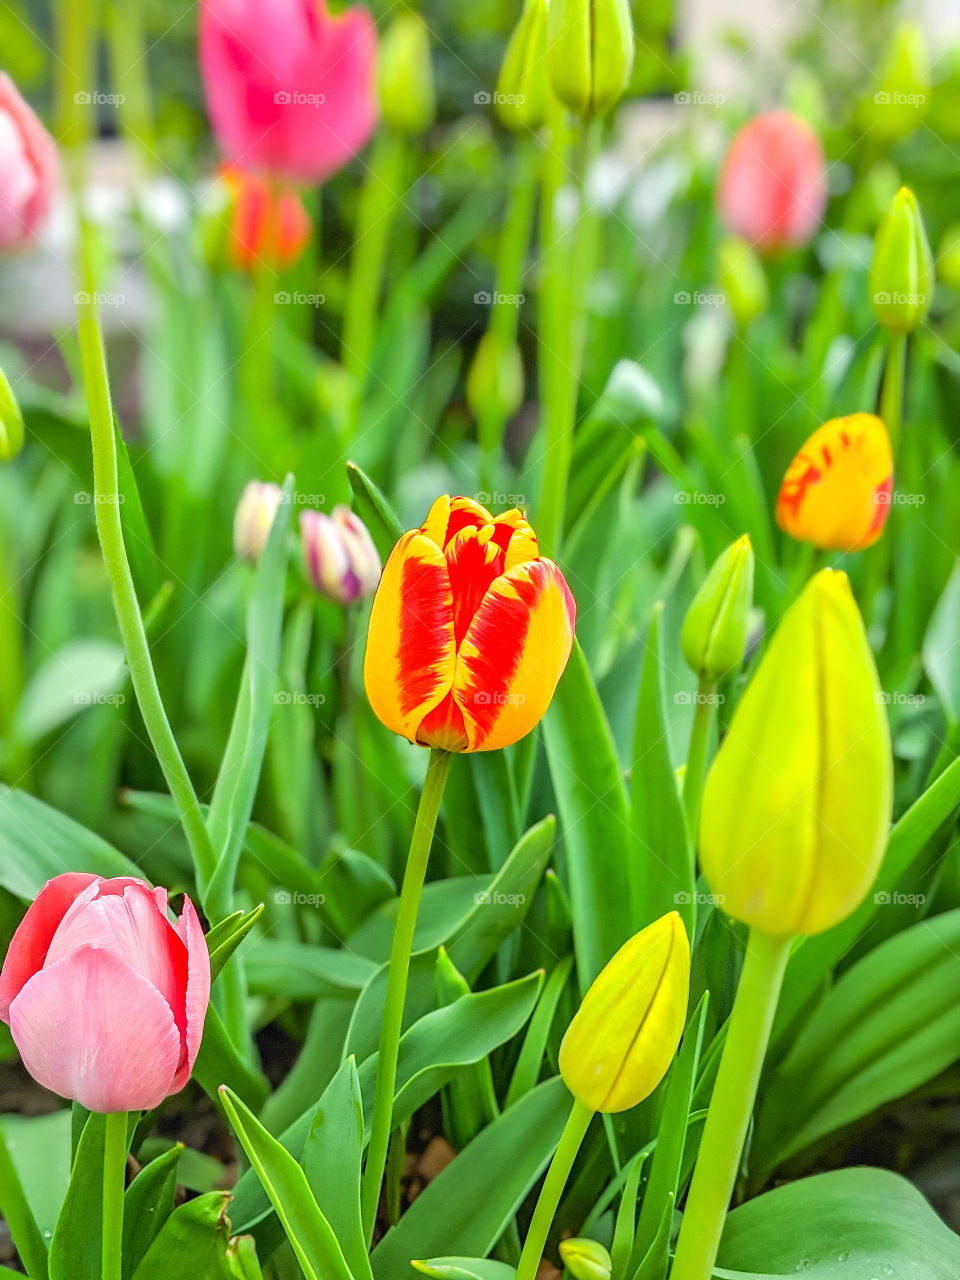 Vibrant and Colorful Tulips